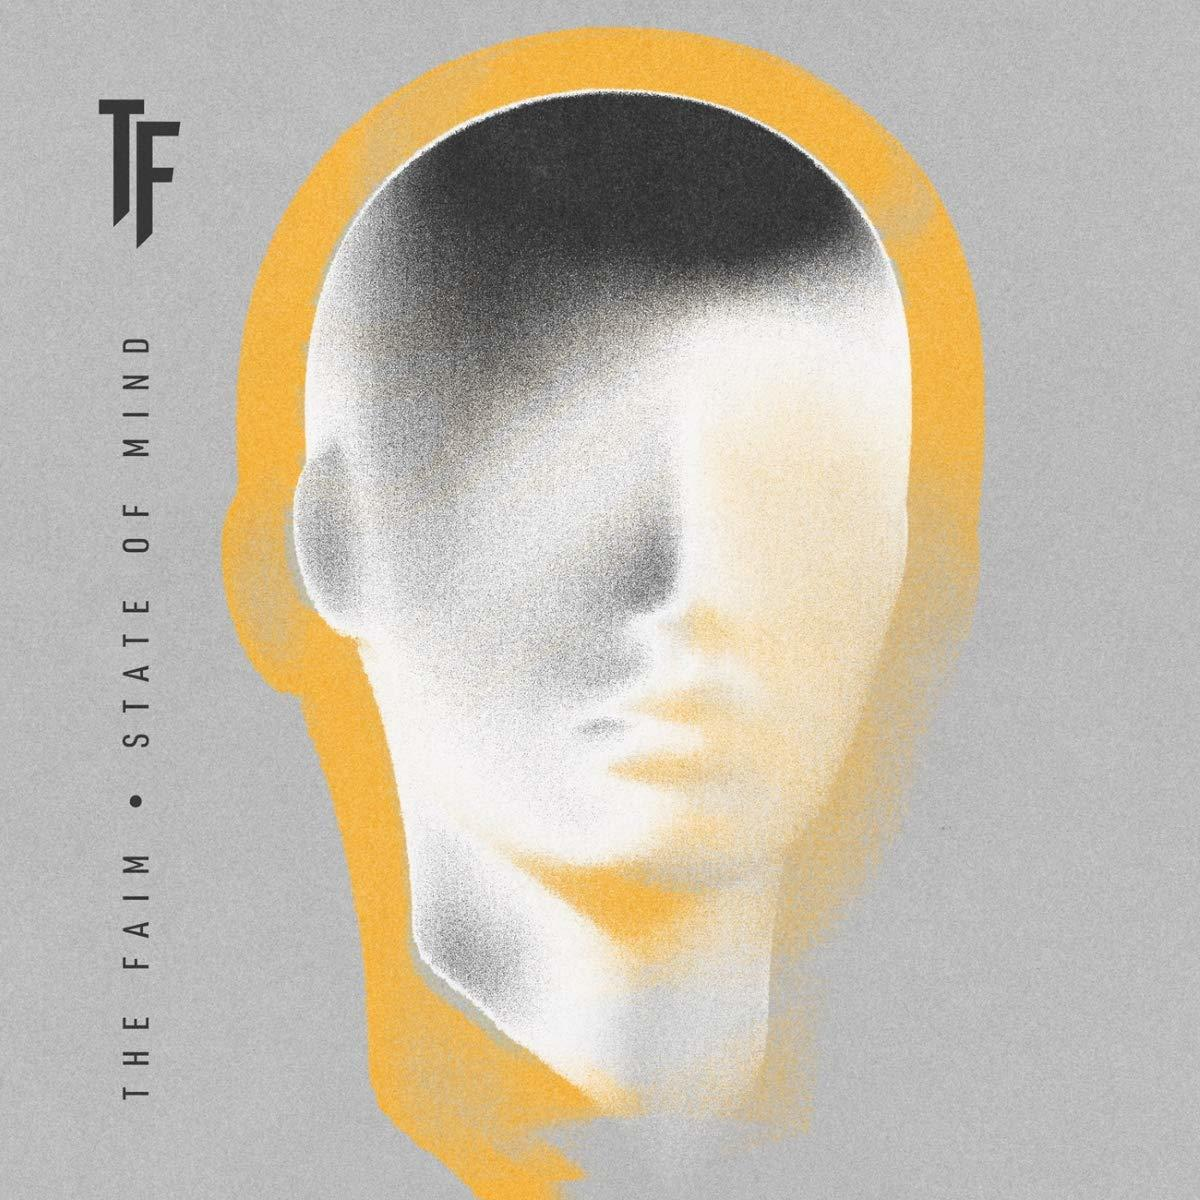 The Faim - State (CD) - of Mind (Deluxe)